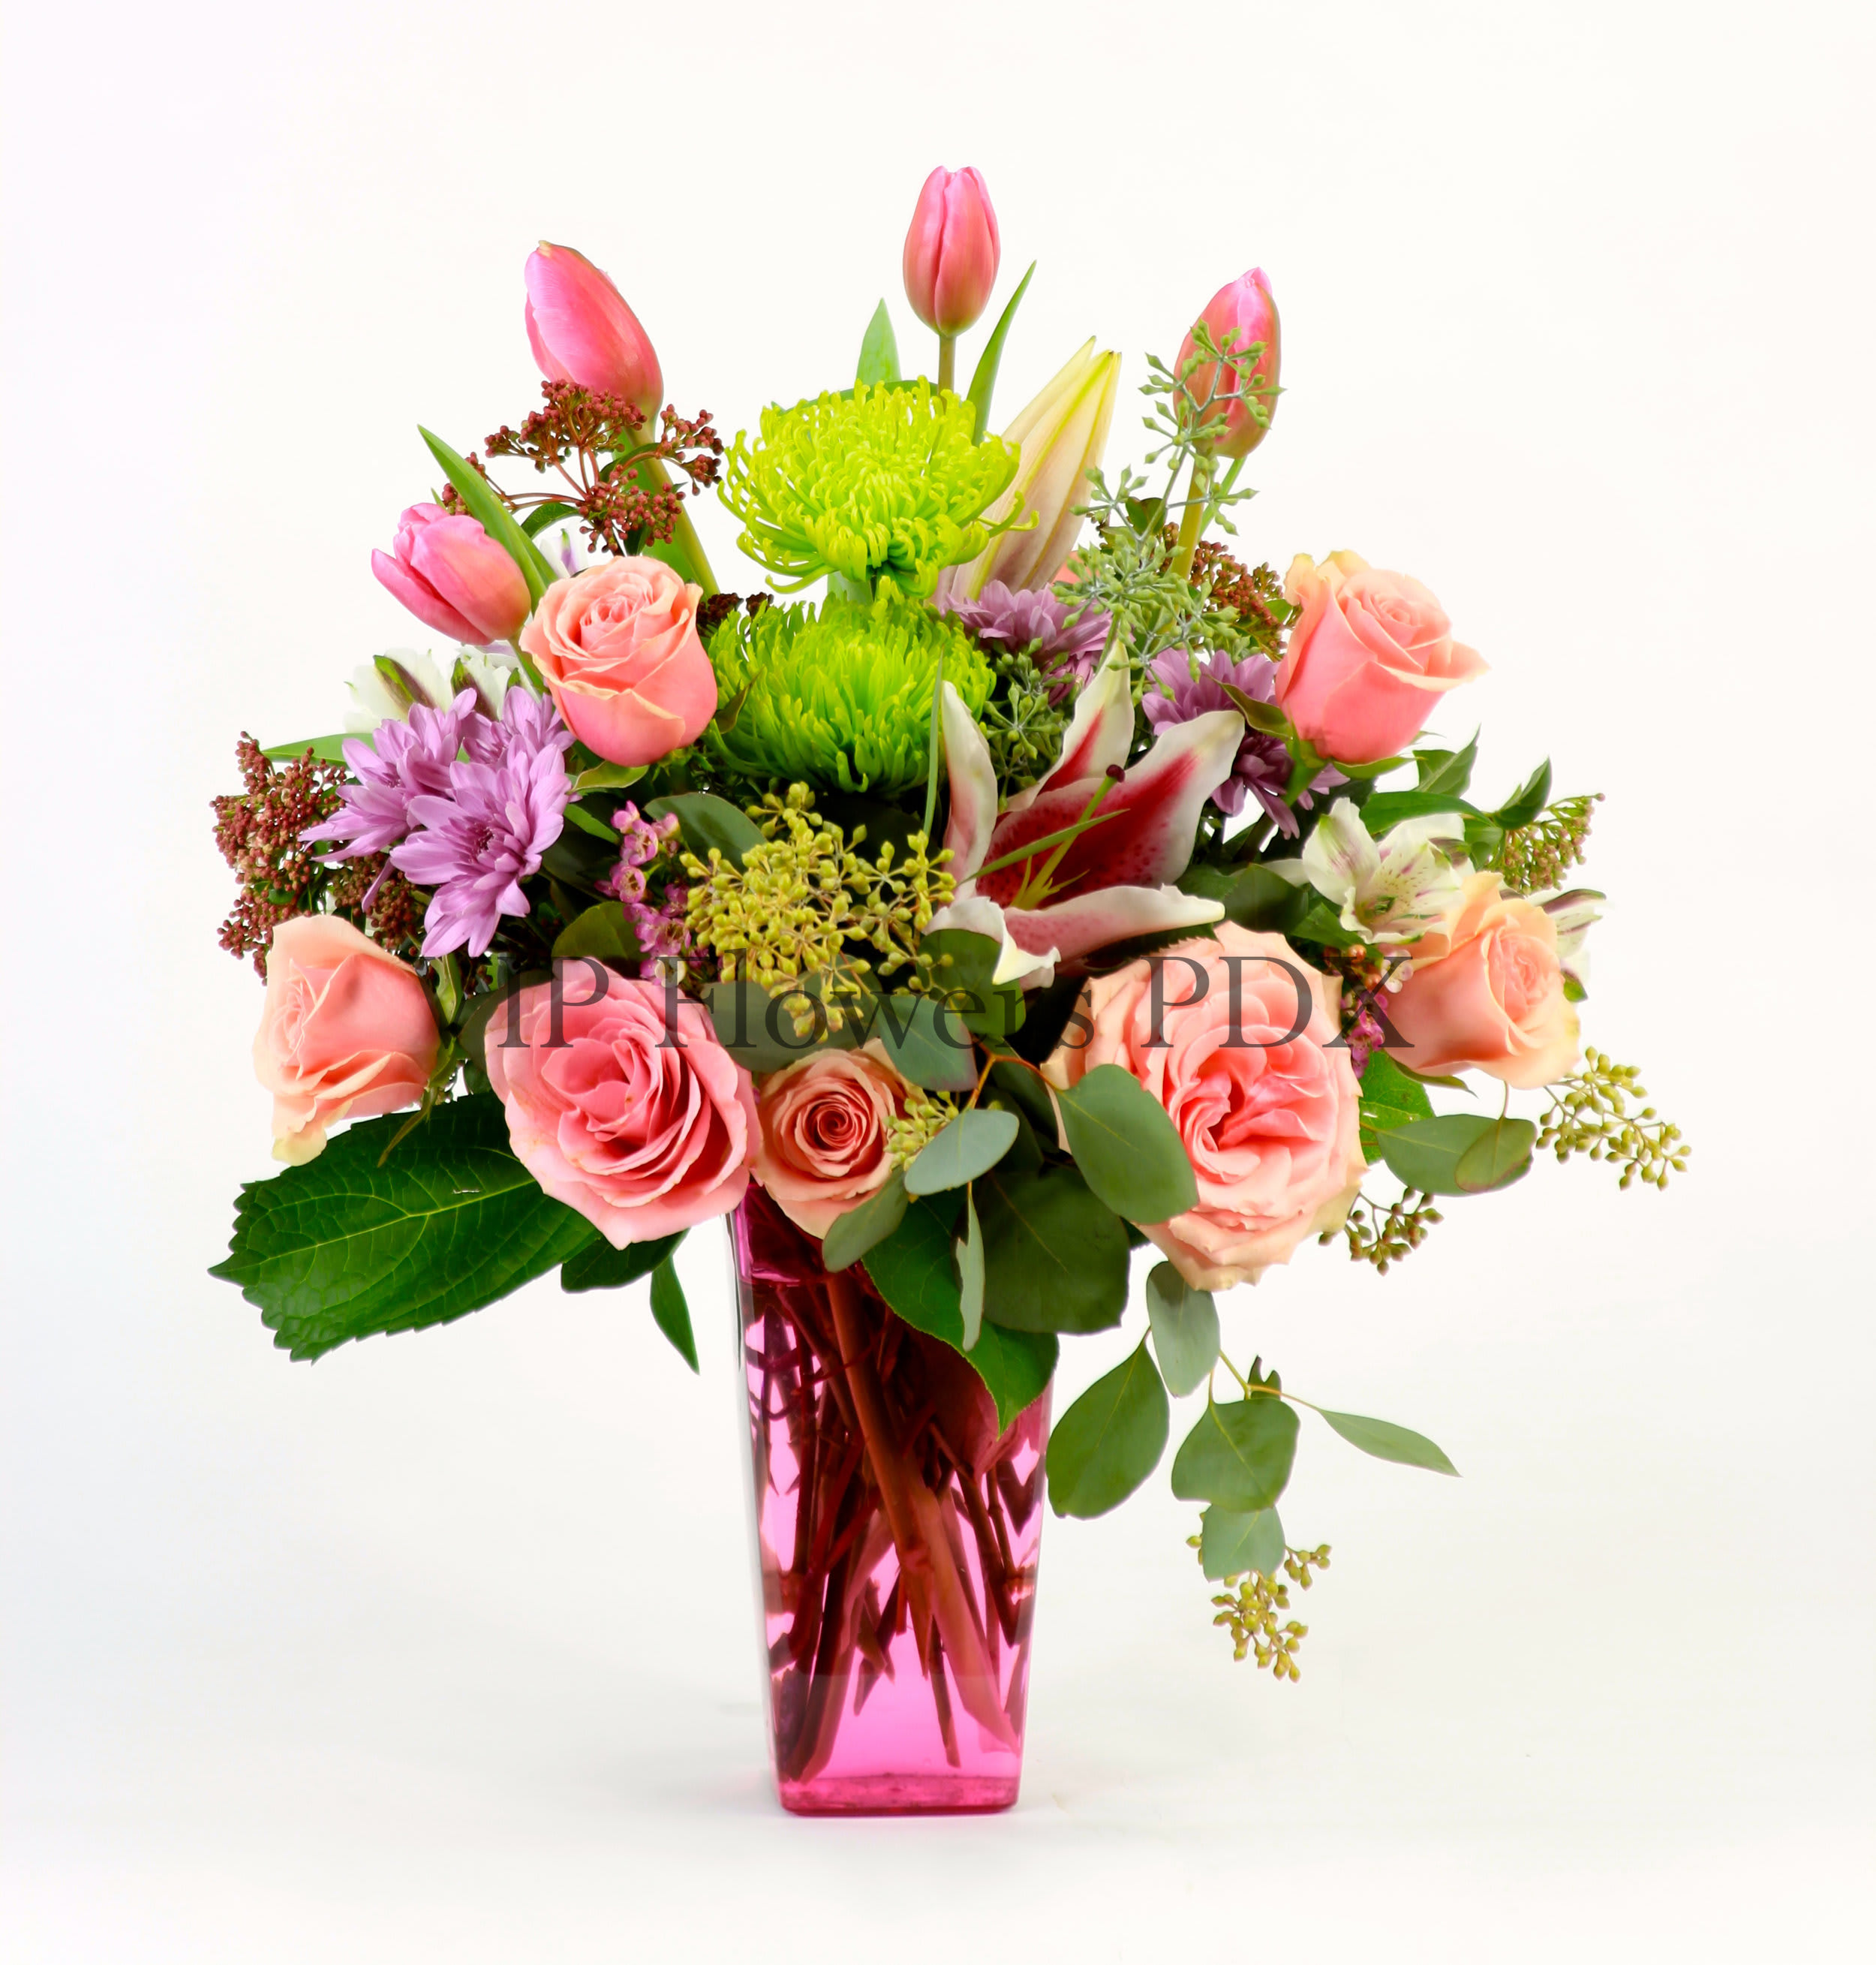 Pink Wonderland - Substitutions may be necessary to ensure your arrangement or specialty gift is delivered in a timely manner. The utmost care and attention is given to your order to ensure that it is as similar as possible to the requested item (Please note that some flowers and colors may vary due to seasonality.)